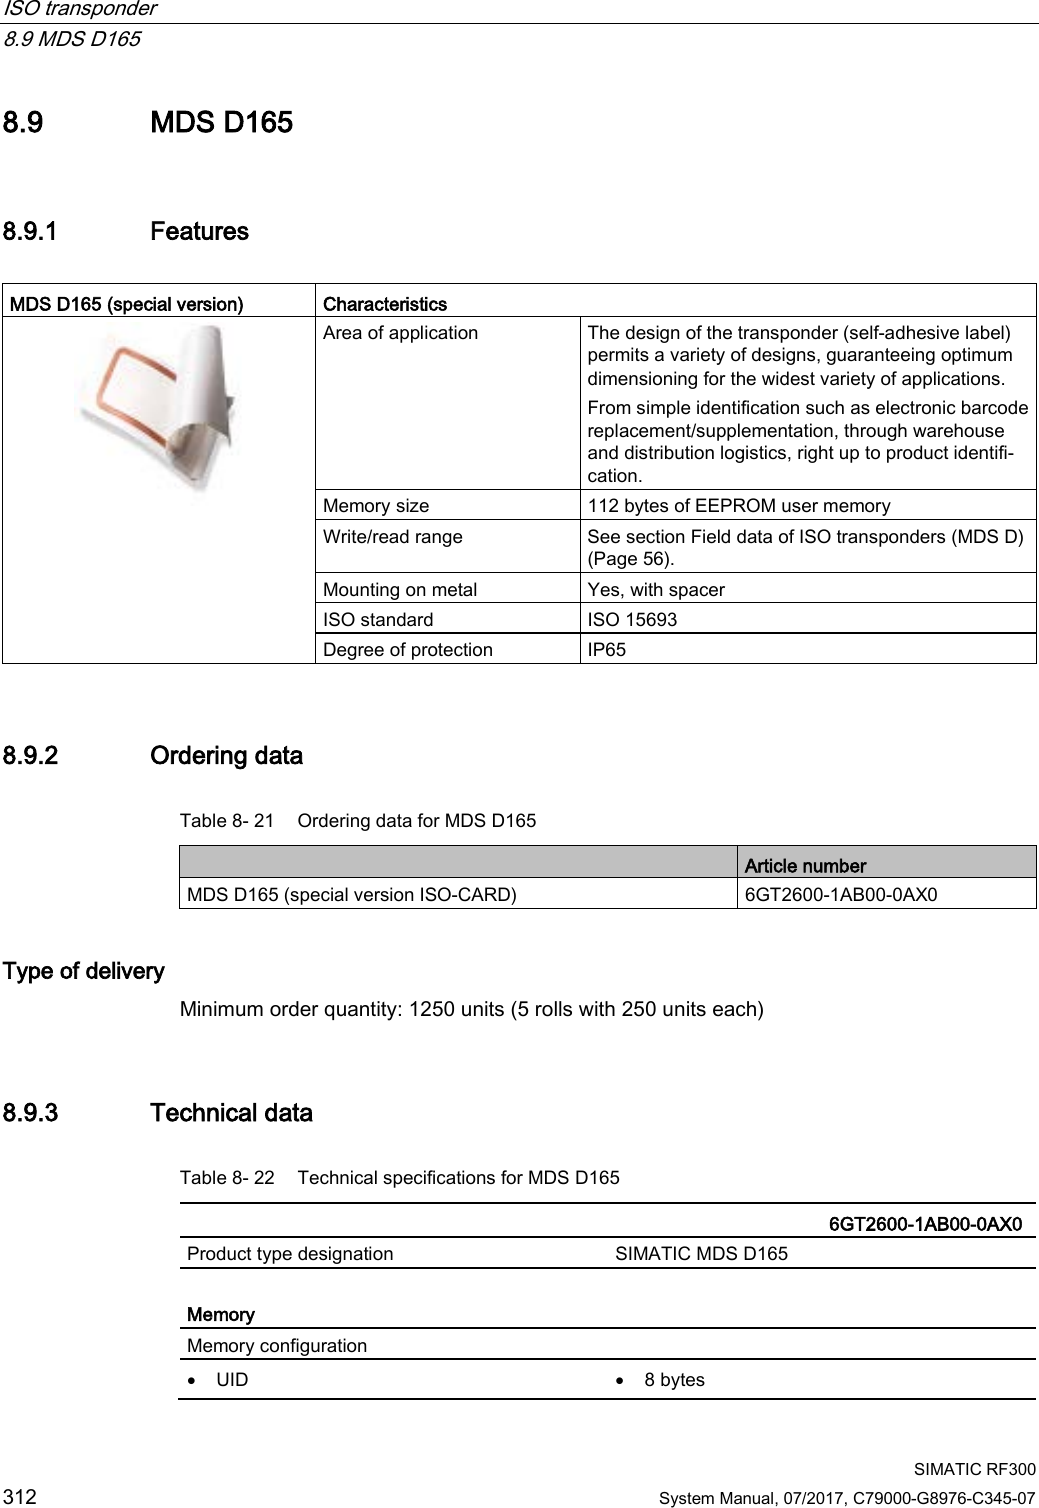 ISO transponder   8.9 MDS D165  SIMATIC RF300 312 System Manual, 07/2017, C79000-G8976-C345-07 8.9 MDS D165 8.9.1 Features  MDS D165 (special version)  Characteristics  Area of application The design of the transponder (self-adhesive label) permits a variety of designs, guaranteeing optimum dimensioning for the widest variety of applications. From simple identification such as electronic barcode replacement/supplementation, through warehouse and distribution logistics, right up to product identifi-cation. Memory size 112 bytes of EEPROM user memory Write/read range See section Field data of ISO transponders (MDS D) (Page 56). Mounting on metal Yes, with spacer ISO standard ISO 15693 Degree of protection IP65 8.9.2 Ordering data Table 8- 21 Ordering data for MDS D165  Article number MDS D165 (special version ISO-CARD) 6GT2600-1AB00-0AX0 Type of delivery Minimum order quantity: 1250 units (5 rolls with 250 units each) 8.9.3 Technical data Table 8- 22 Technical specifications for MDS D165    6GT2600-1AB00-0AX0 Product type designation SIMATIC MDS D165  Memory Memory configuration  • UID • 8 bytes 